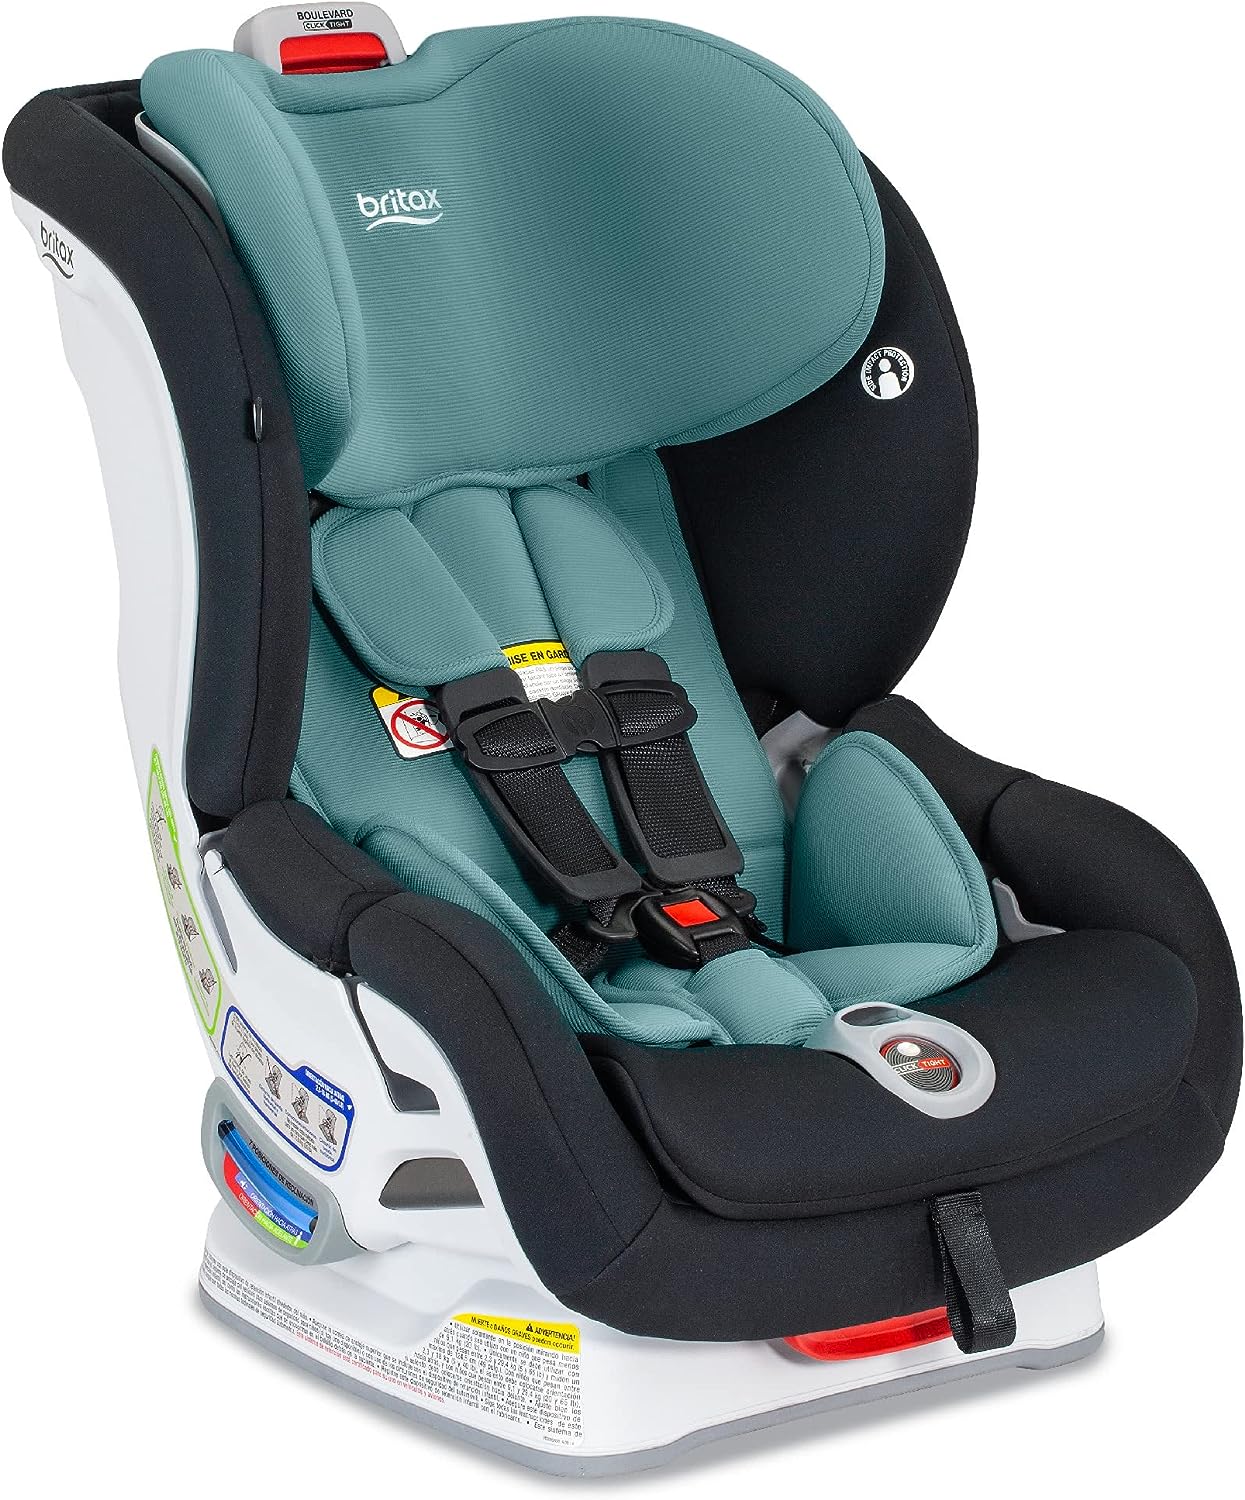 Britax Boulevard Convertible Car Seat, 10 Years of Use, ClickTight, SafeWash, Green Contour, Child Safety Car Seats, Infant to Toddler Car Seat